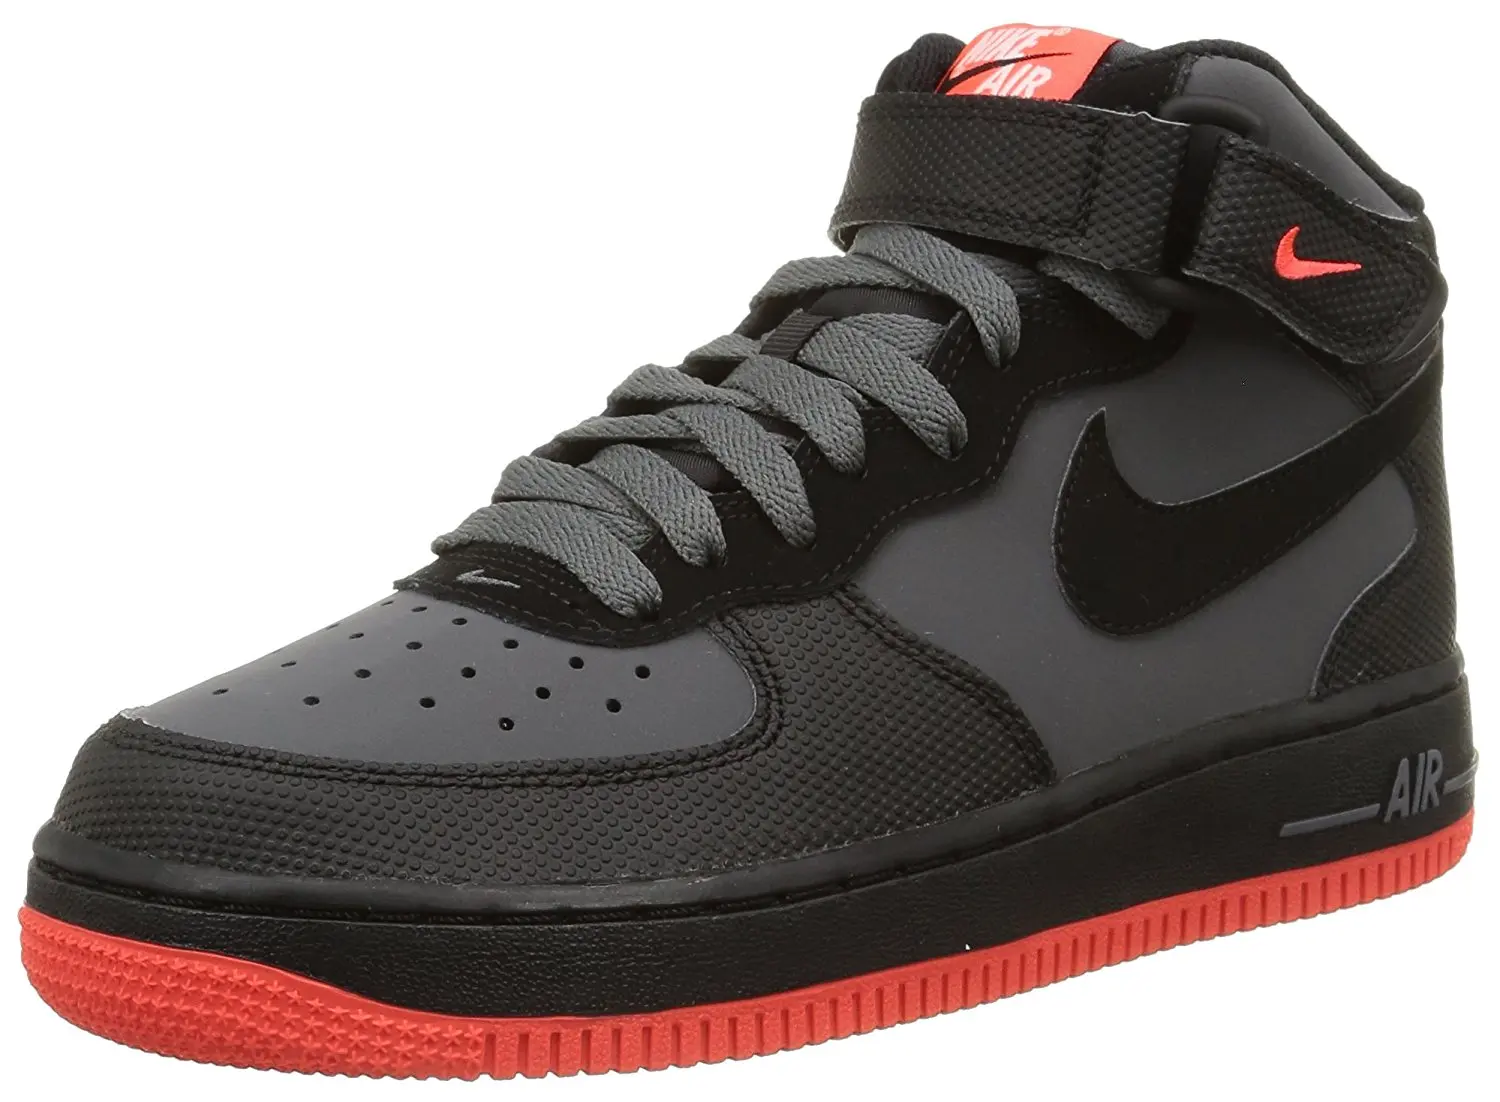 Buy 314195 004 NIKE AIR FORCE 1 MID (GS) Athletic Running Training Shoe ...